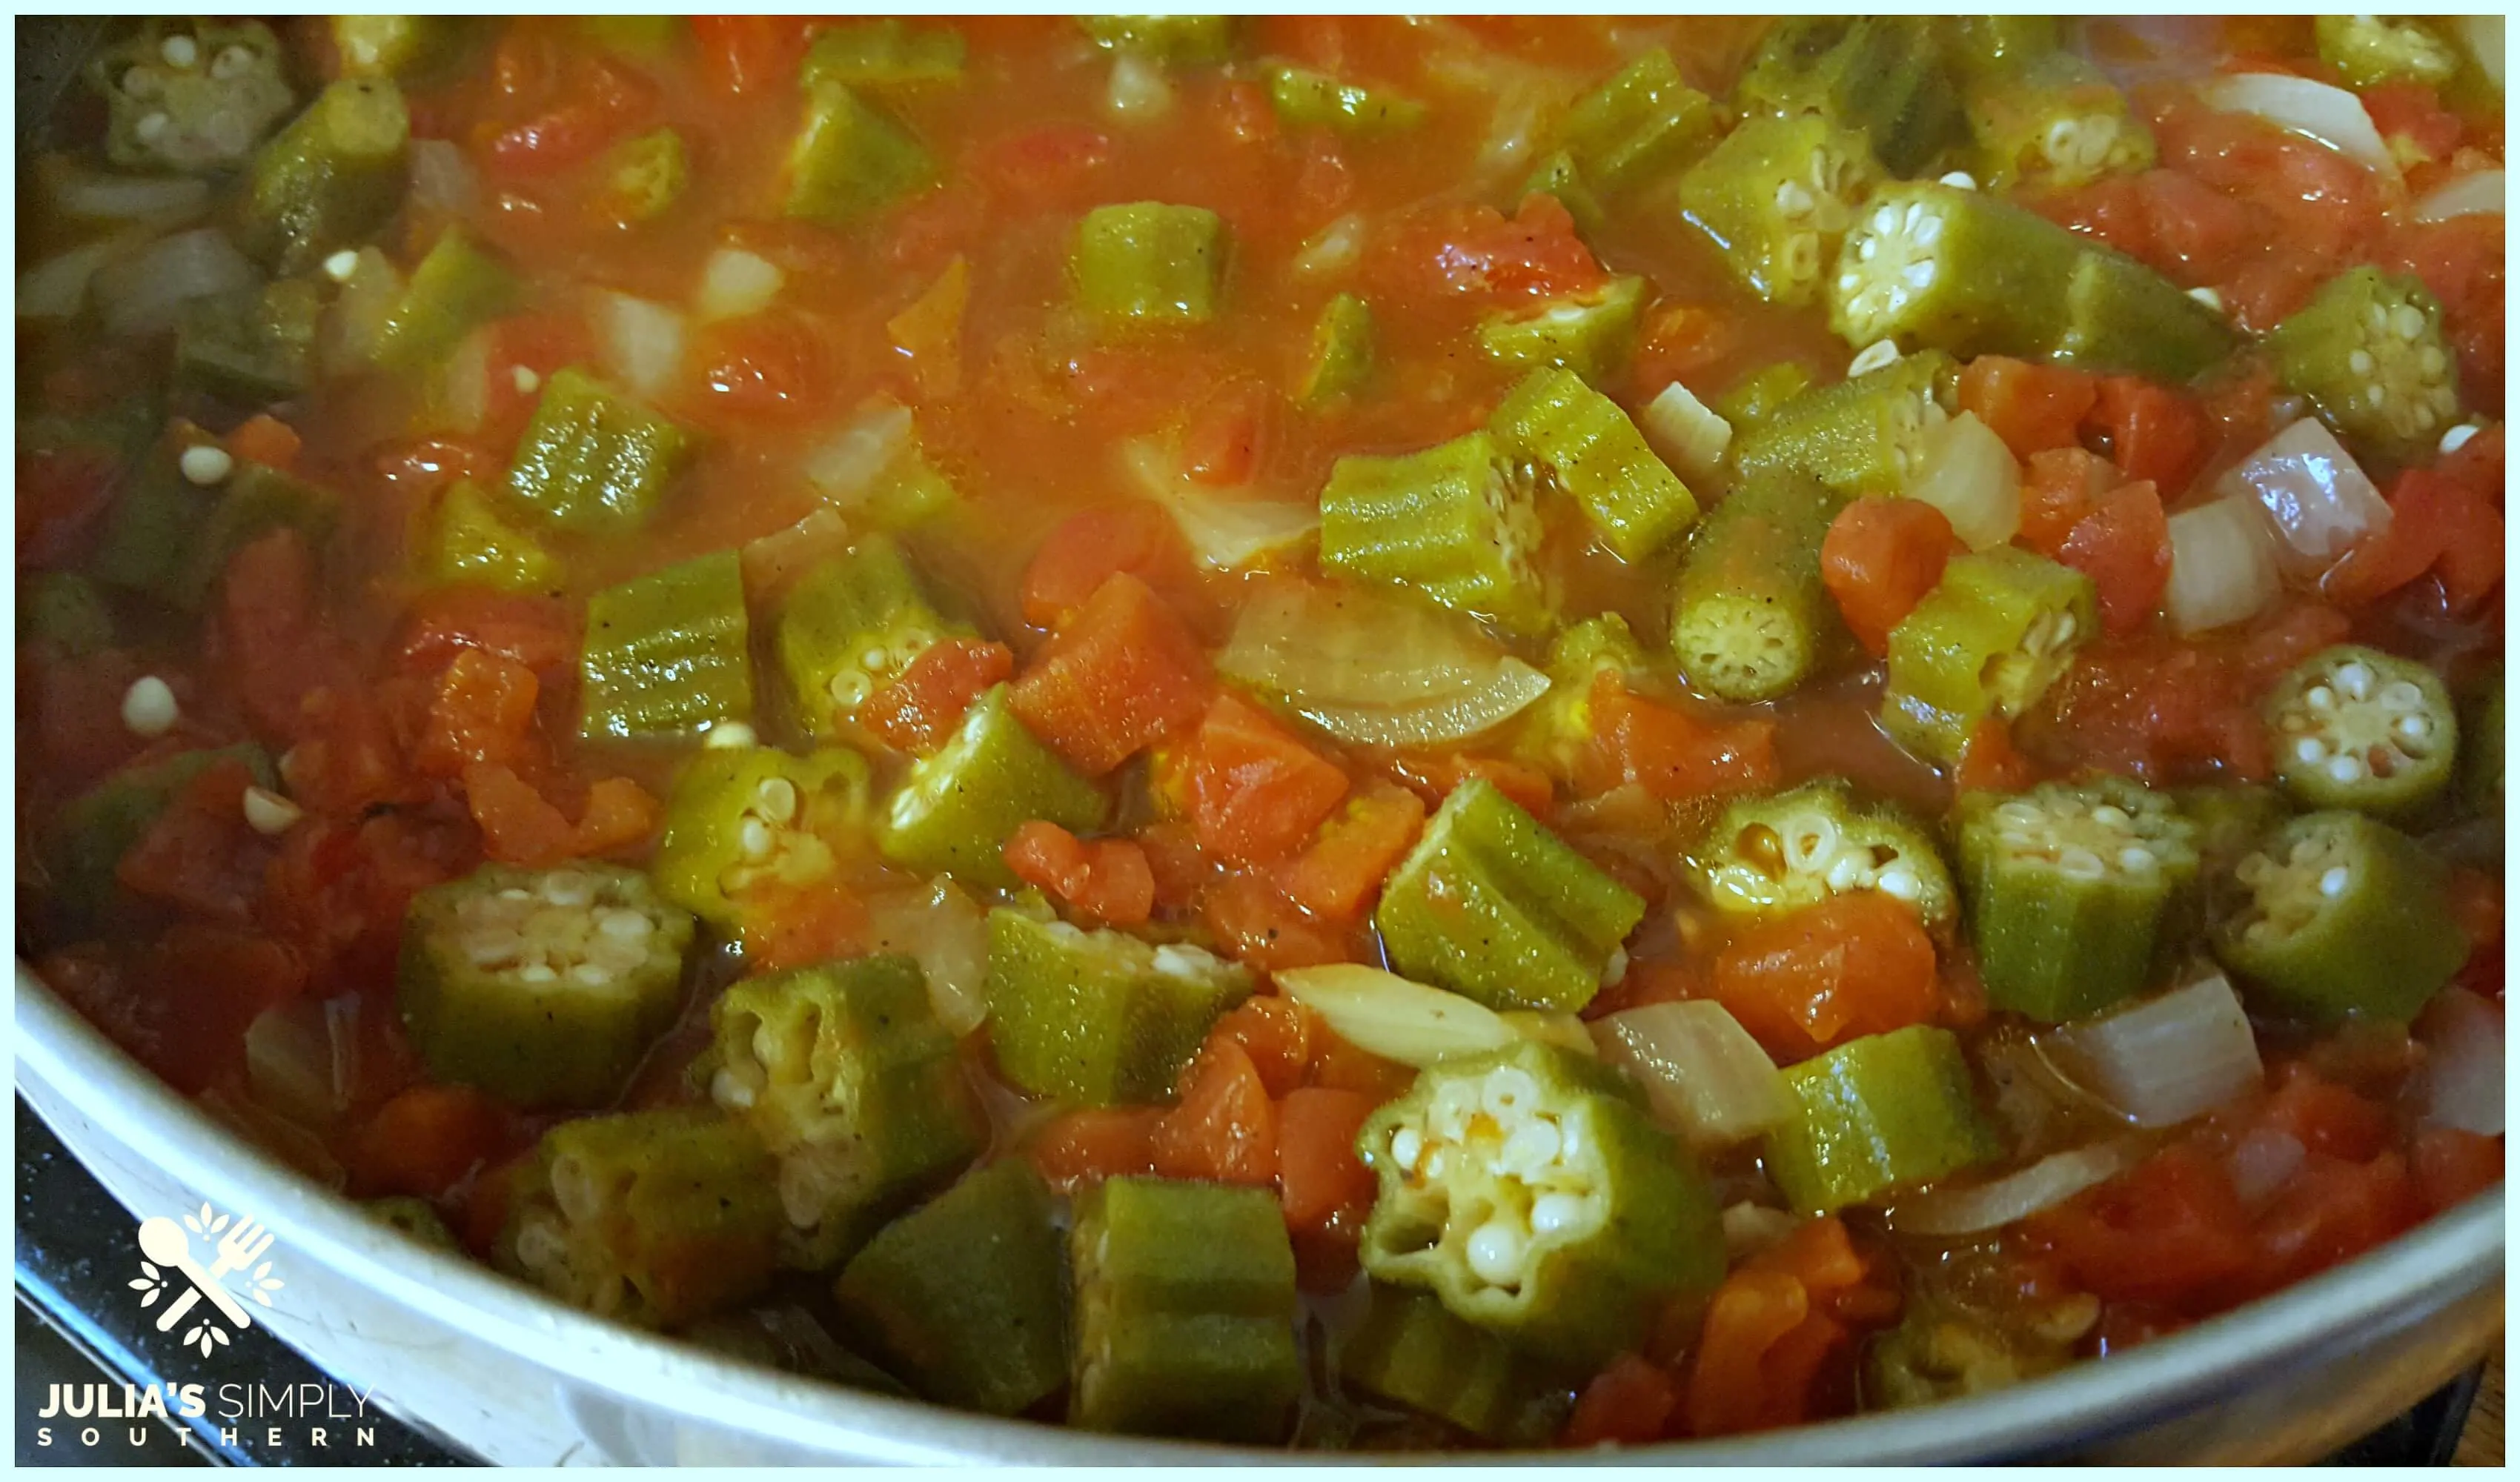 Southern okra and tomatoes cooking